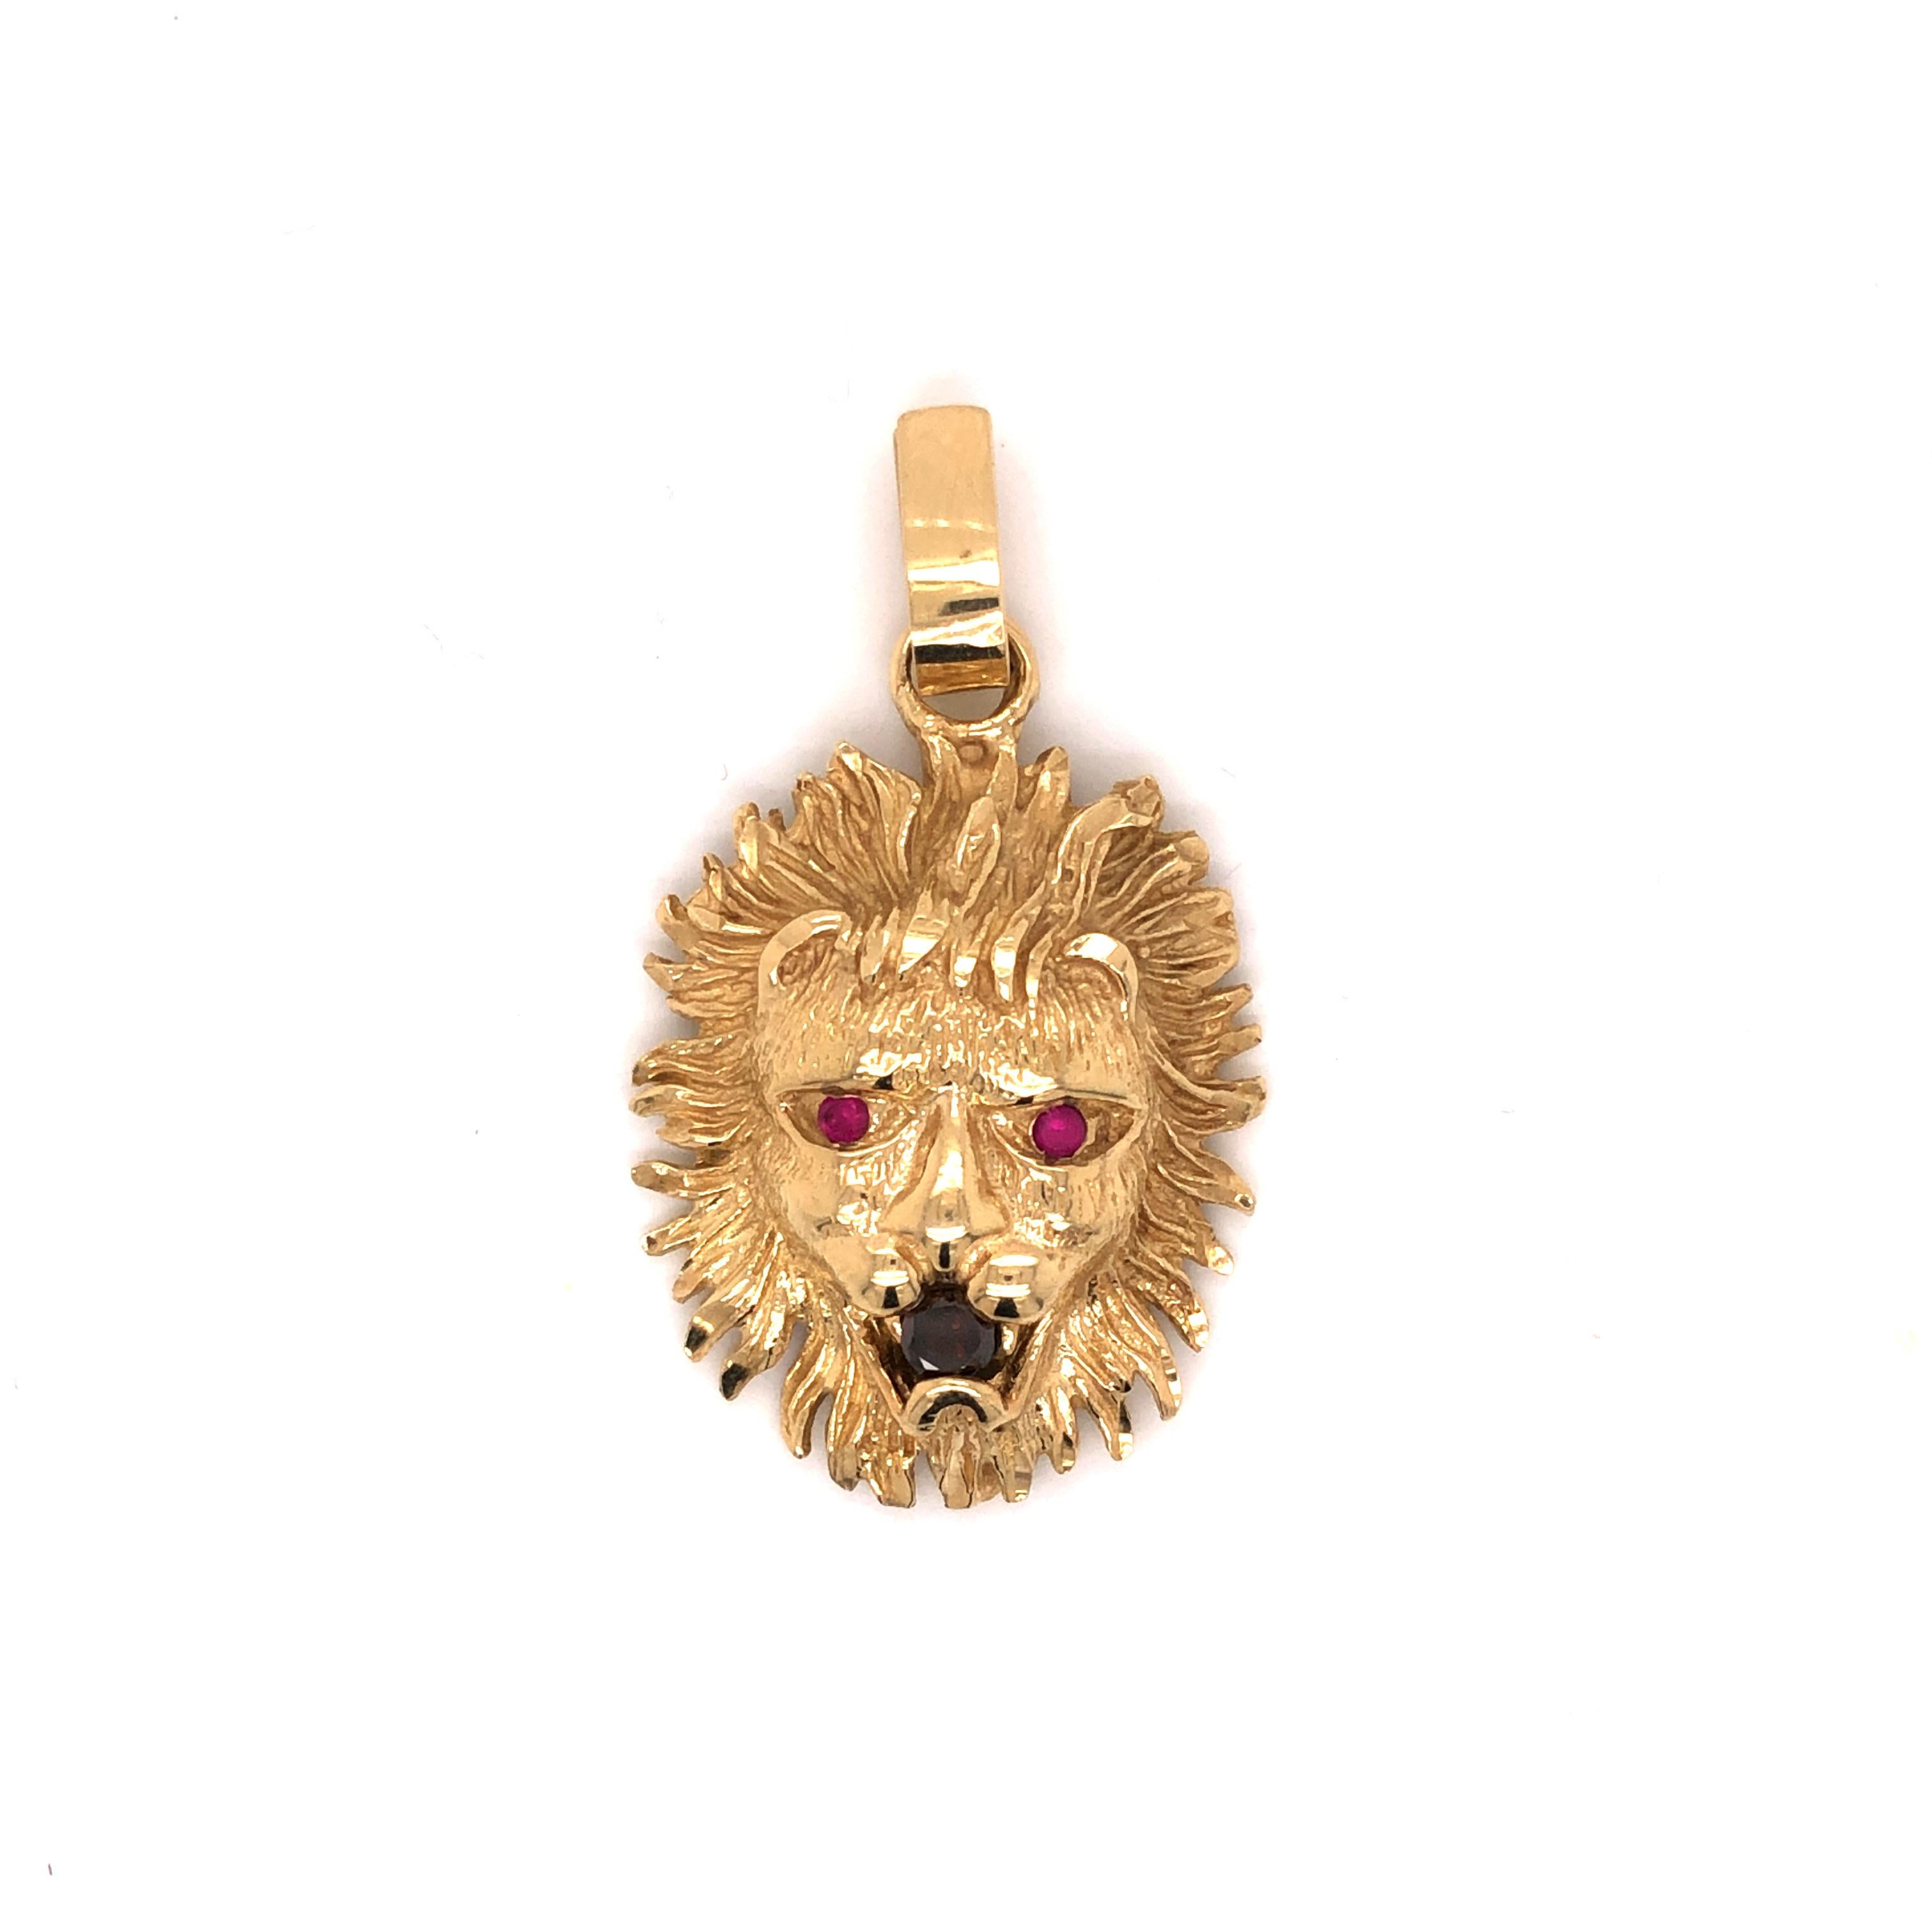 A Vintage 14K Yellow Gold Diamond Ruby Lion's Head Pendant featuring a dark brown diamond weighing approximately .25 carat, with small round ruby eyes.
*Chain not included

Stone: Brown Diamond, Ruby

Metal: 14K Yellow Gold

Size: 25mm x 44mm

Total